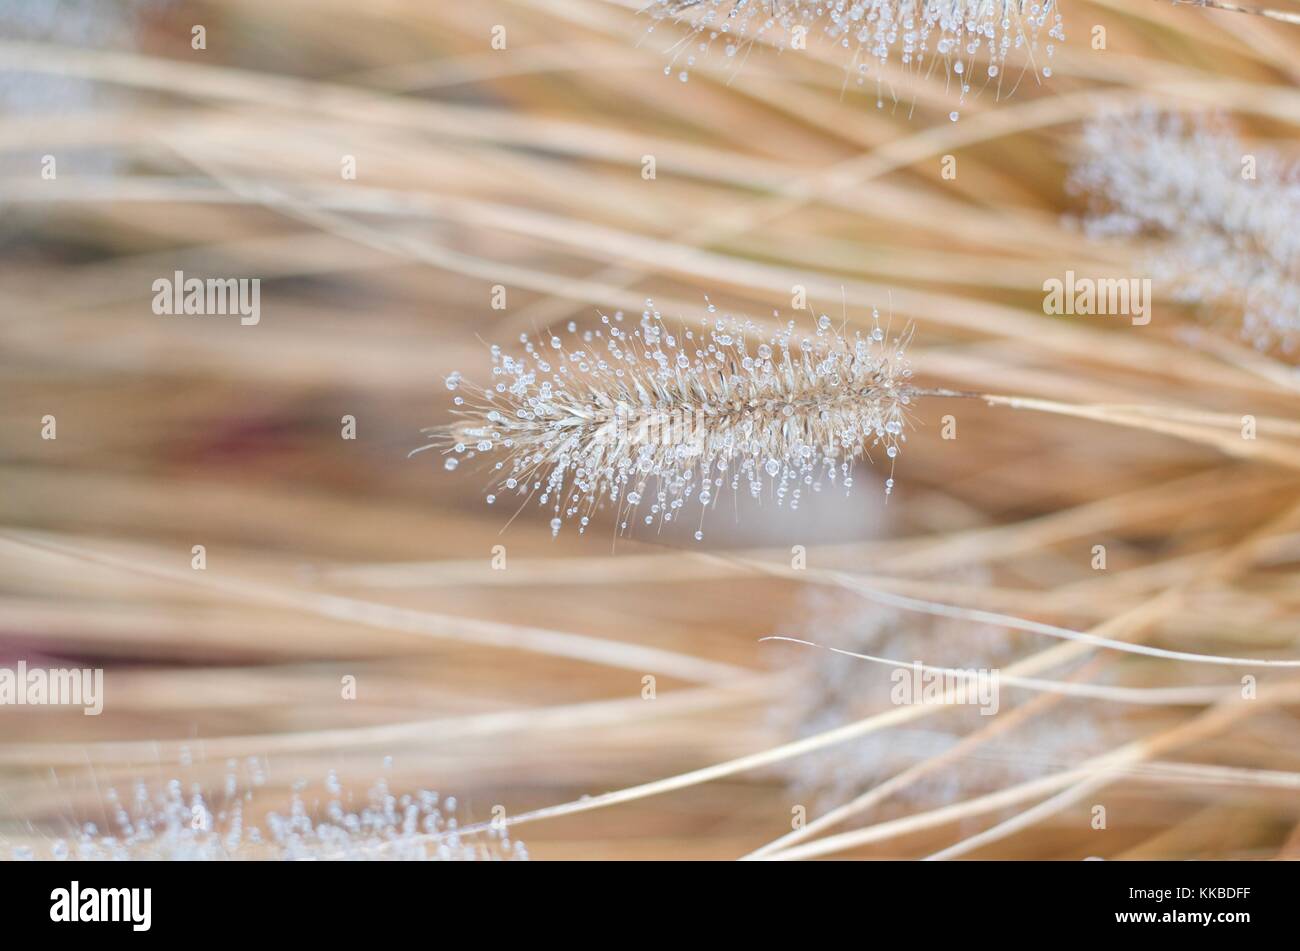 Garden captures of fuzzy tails on cat tails and fancy grasses Stock Photo